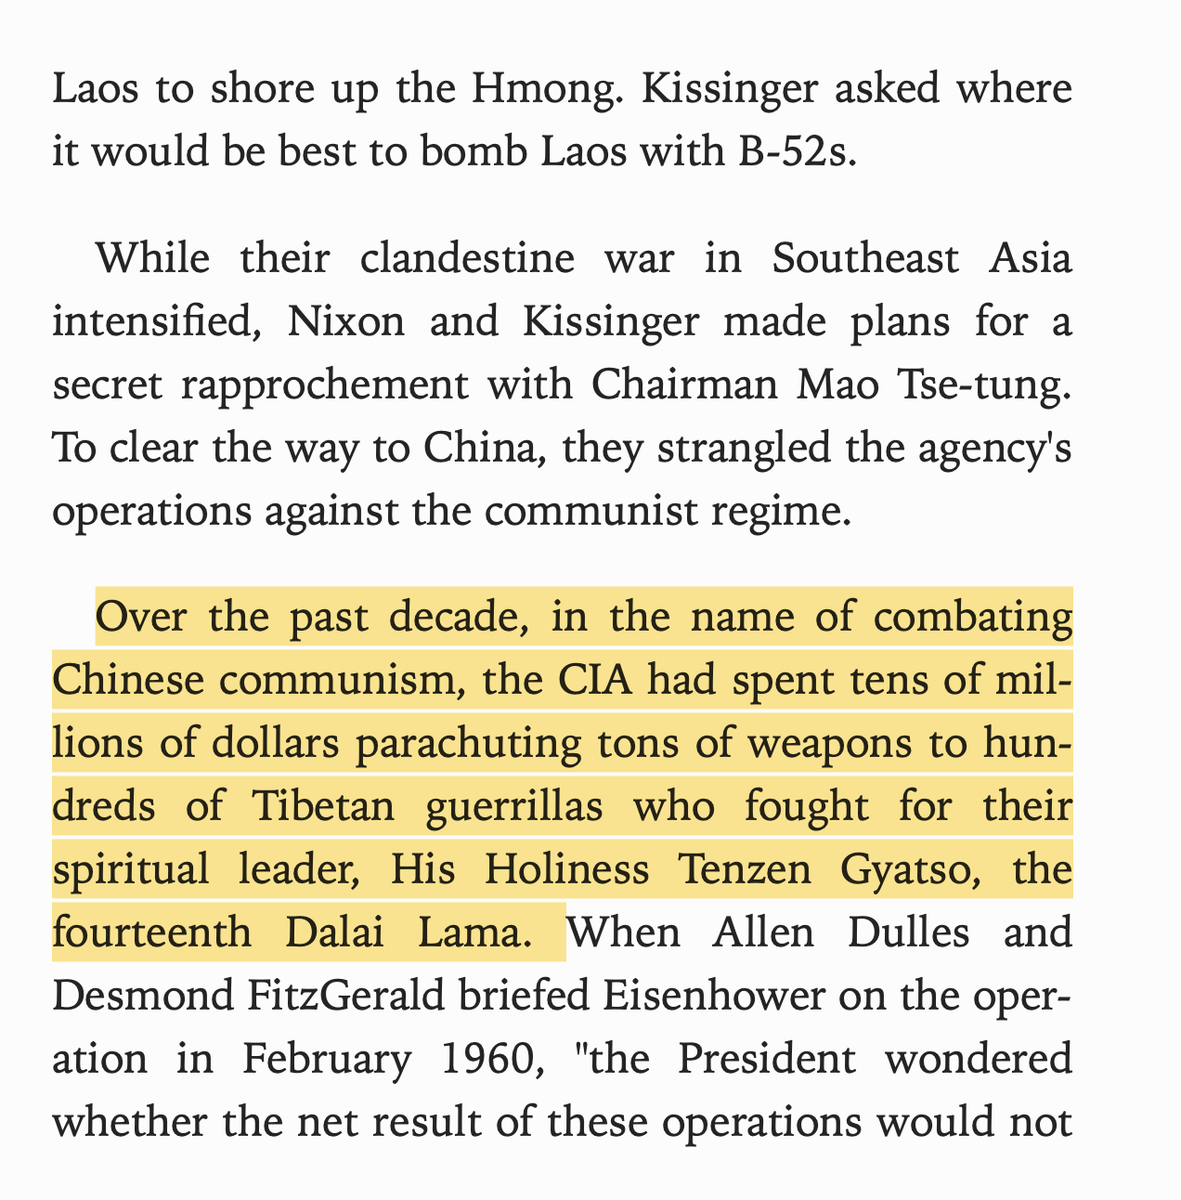 CIA put the Dalai Lama on the payroll and armed the Tibetans against Mao's China. Nixon put an end to this, then Kissinger bonded with Zhou Enlai over how incompetent and worthless the CIA was.